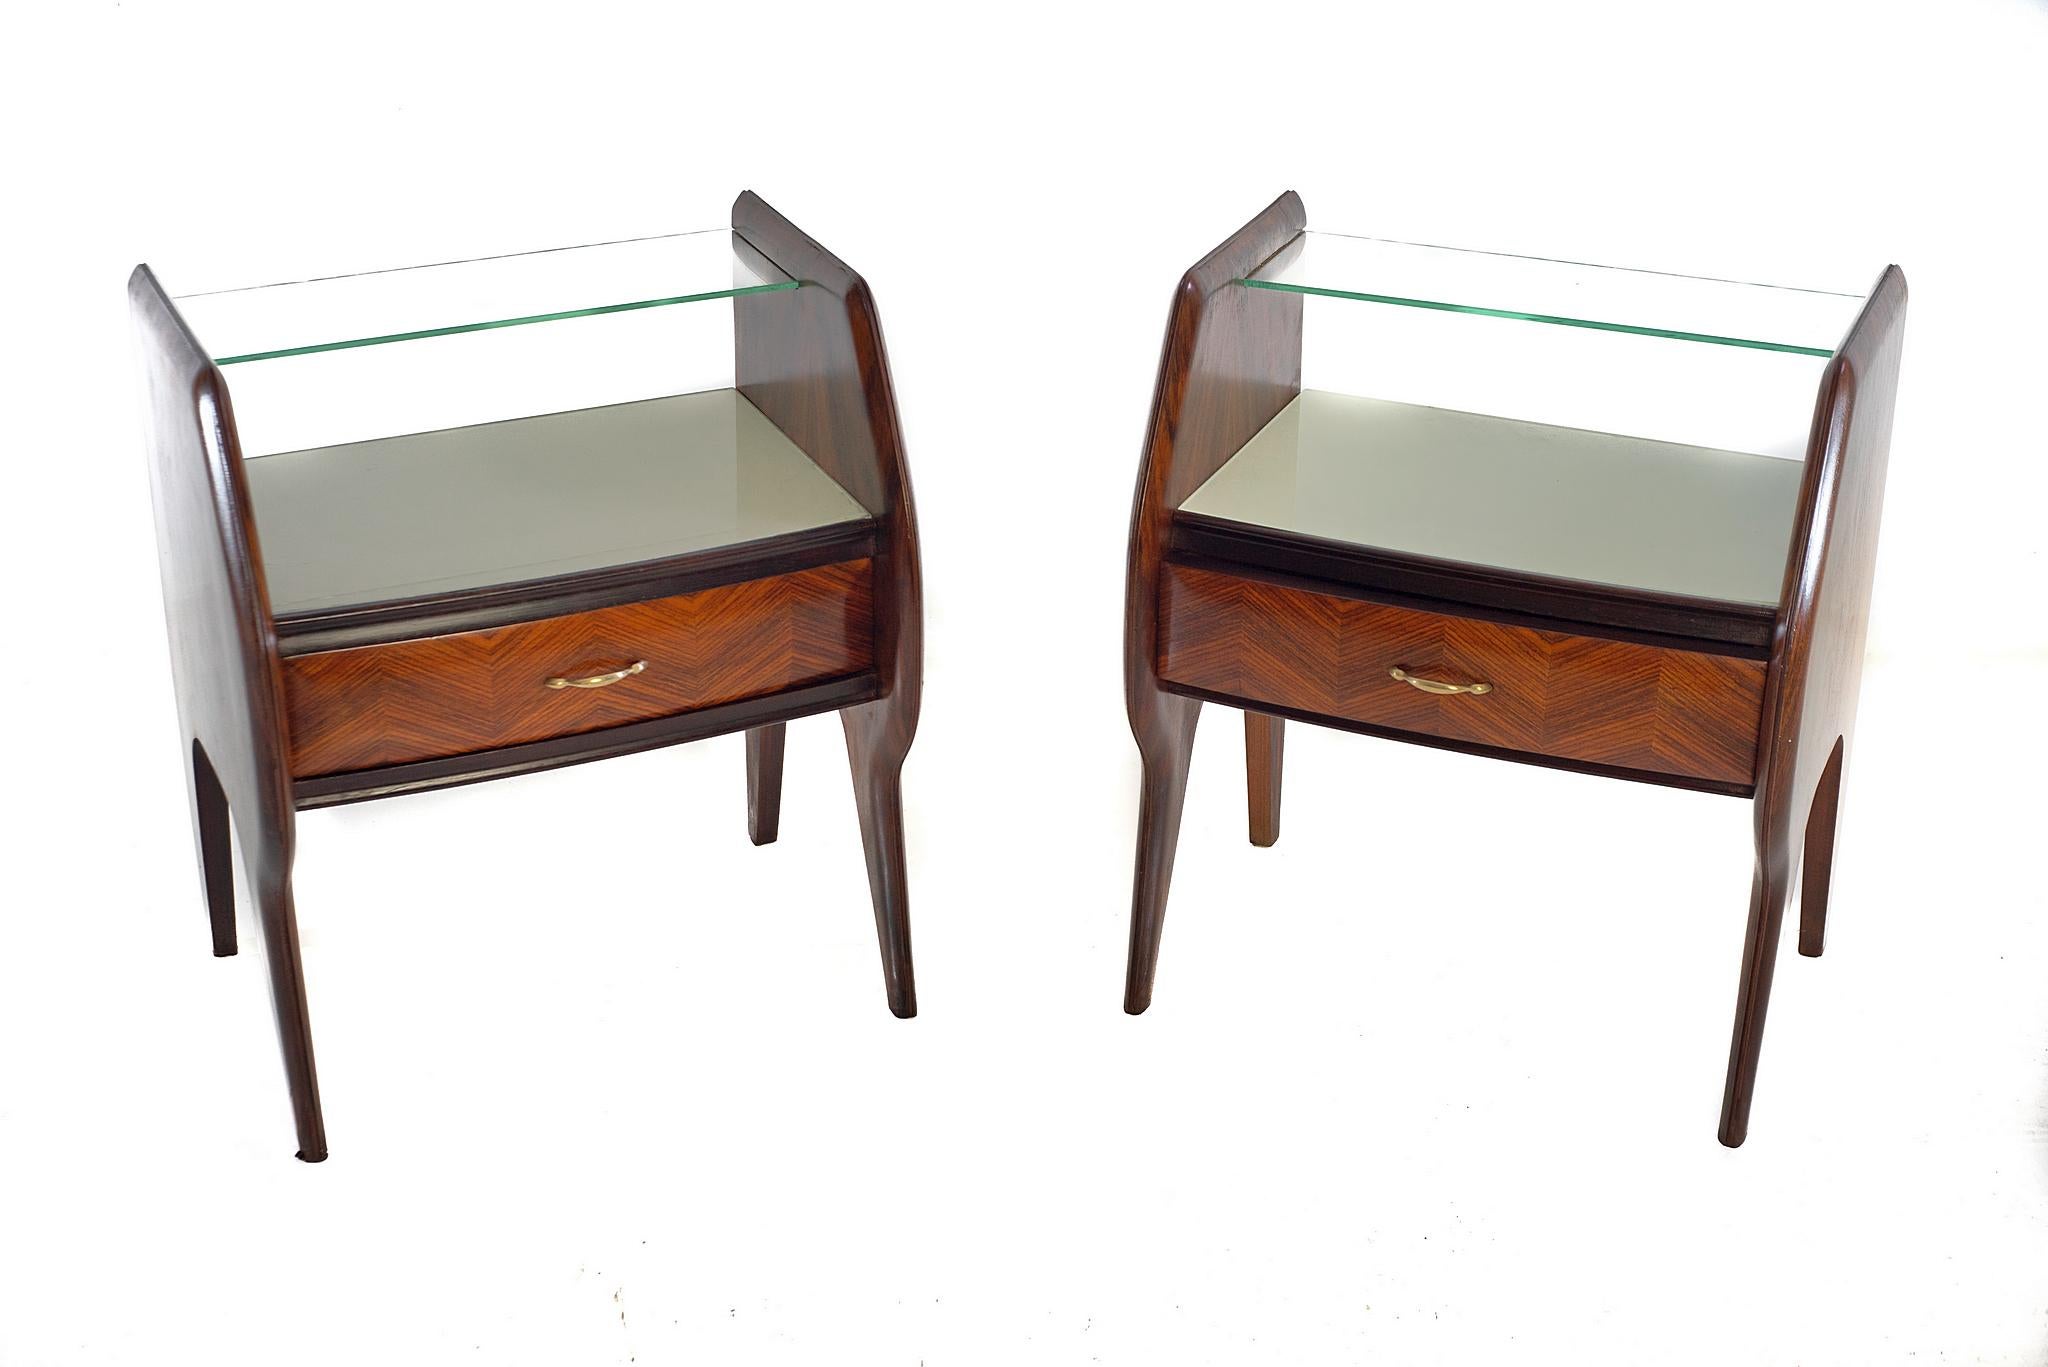 Mid-20th Century Midcentury Italian Nightstands in the manner of Vittorio Dassi For Sale